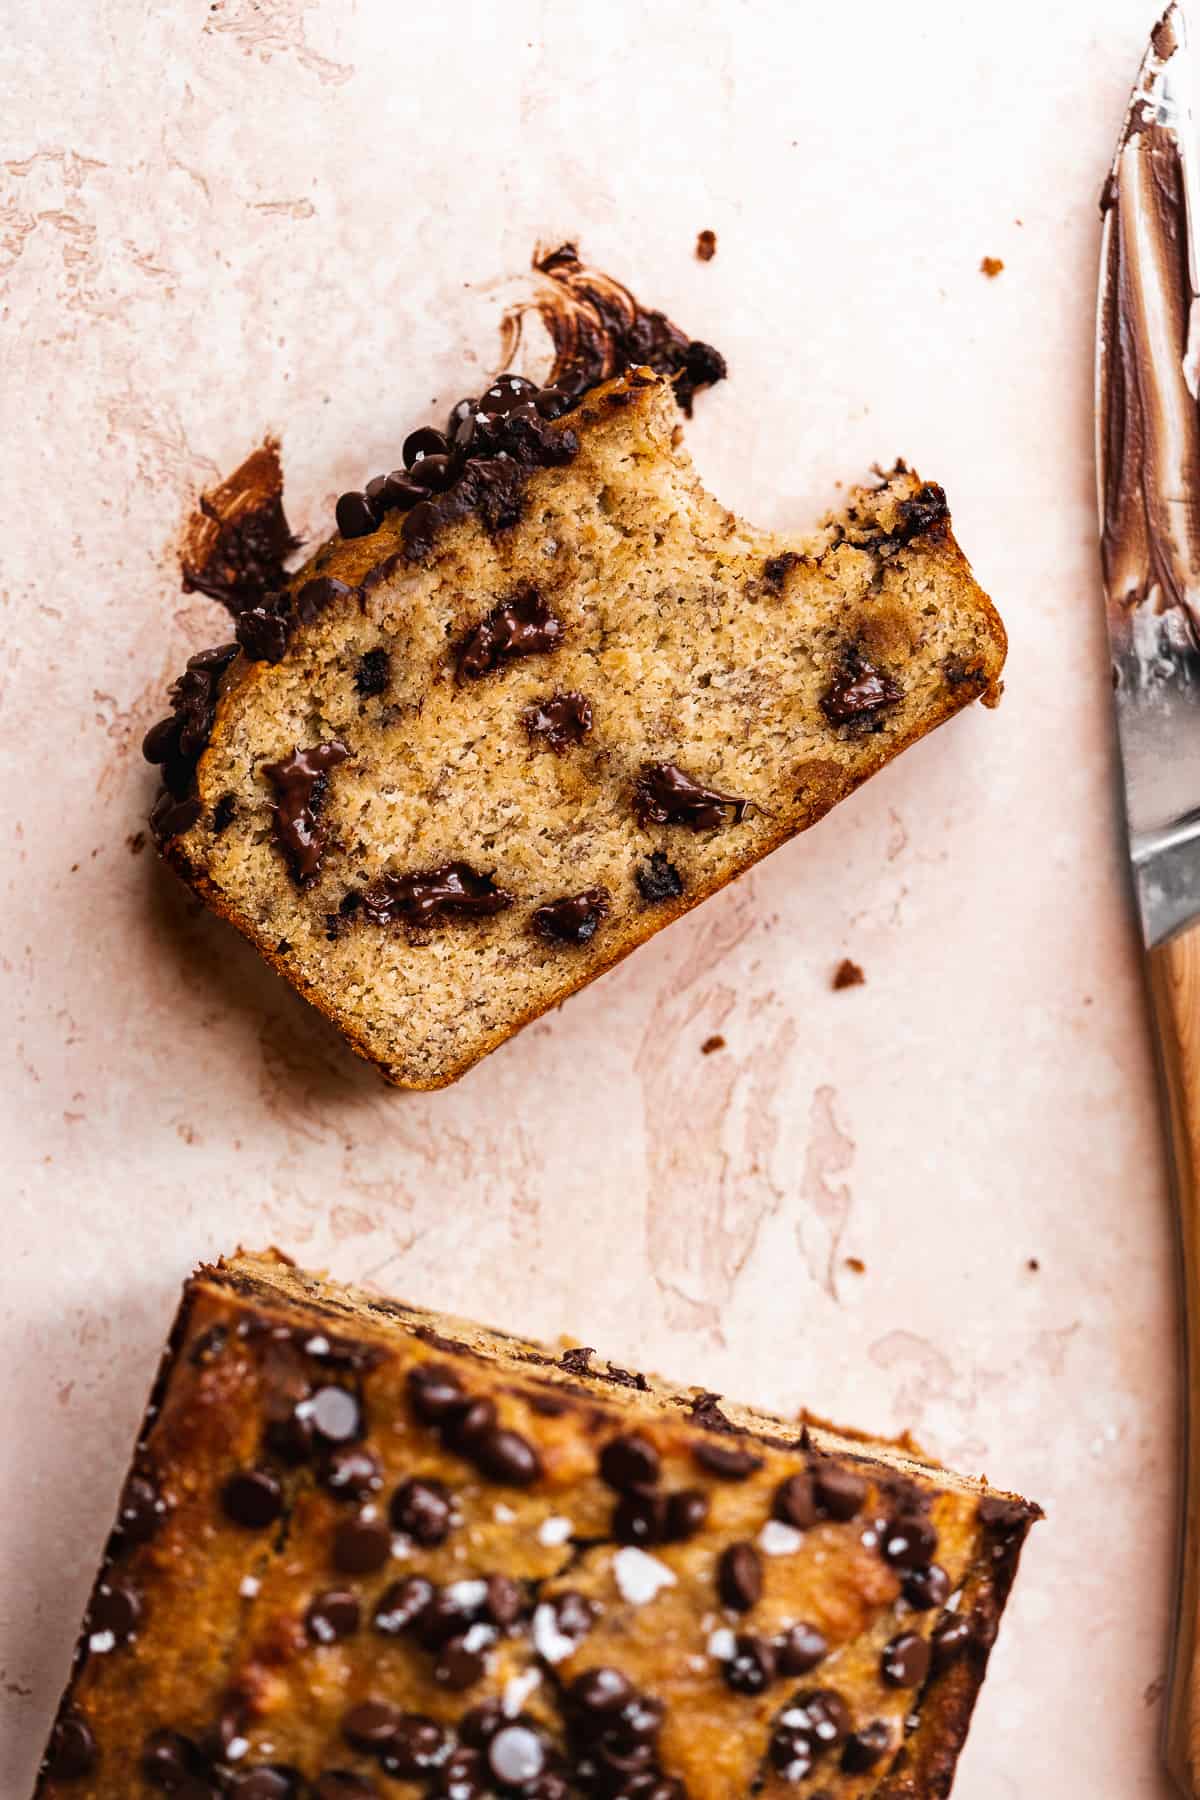 Slice of chocolate chip bread with a bite taken out of it on a pink surface with knife to the side.